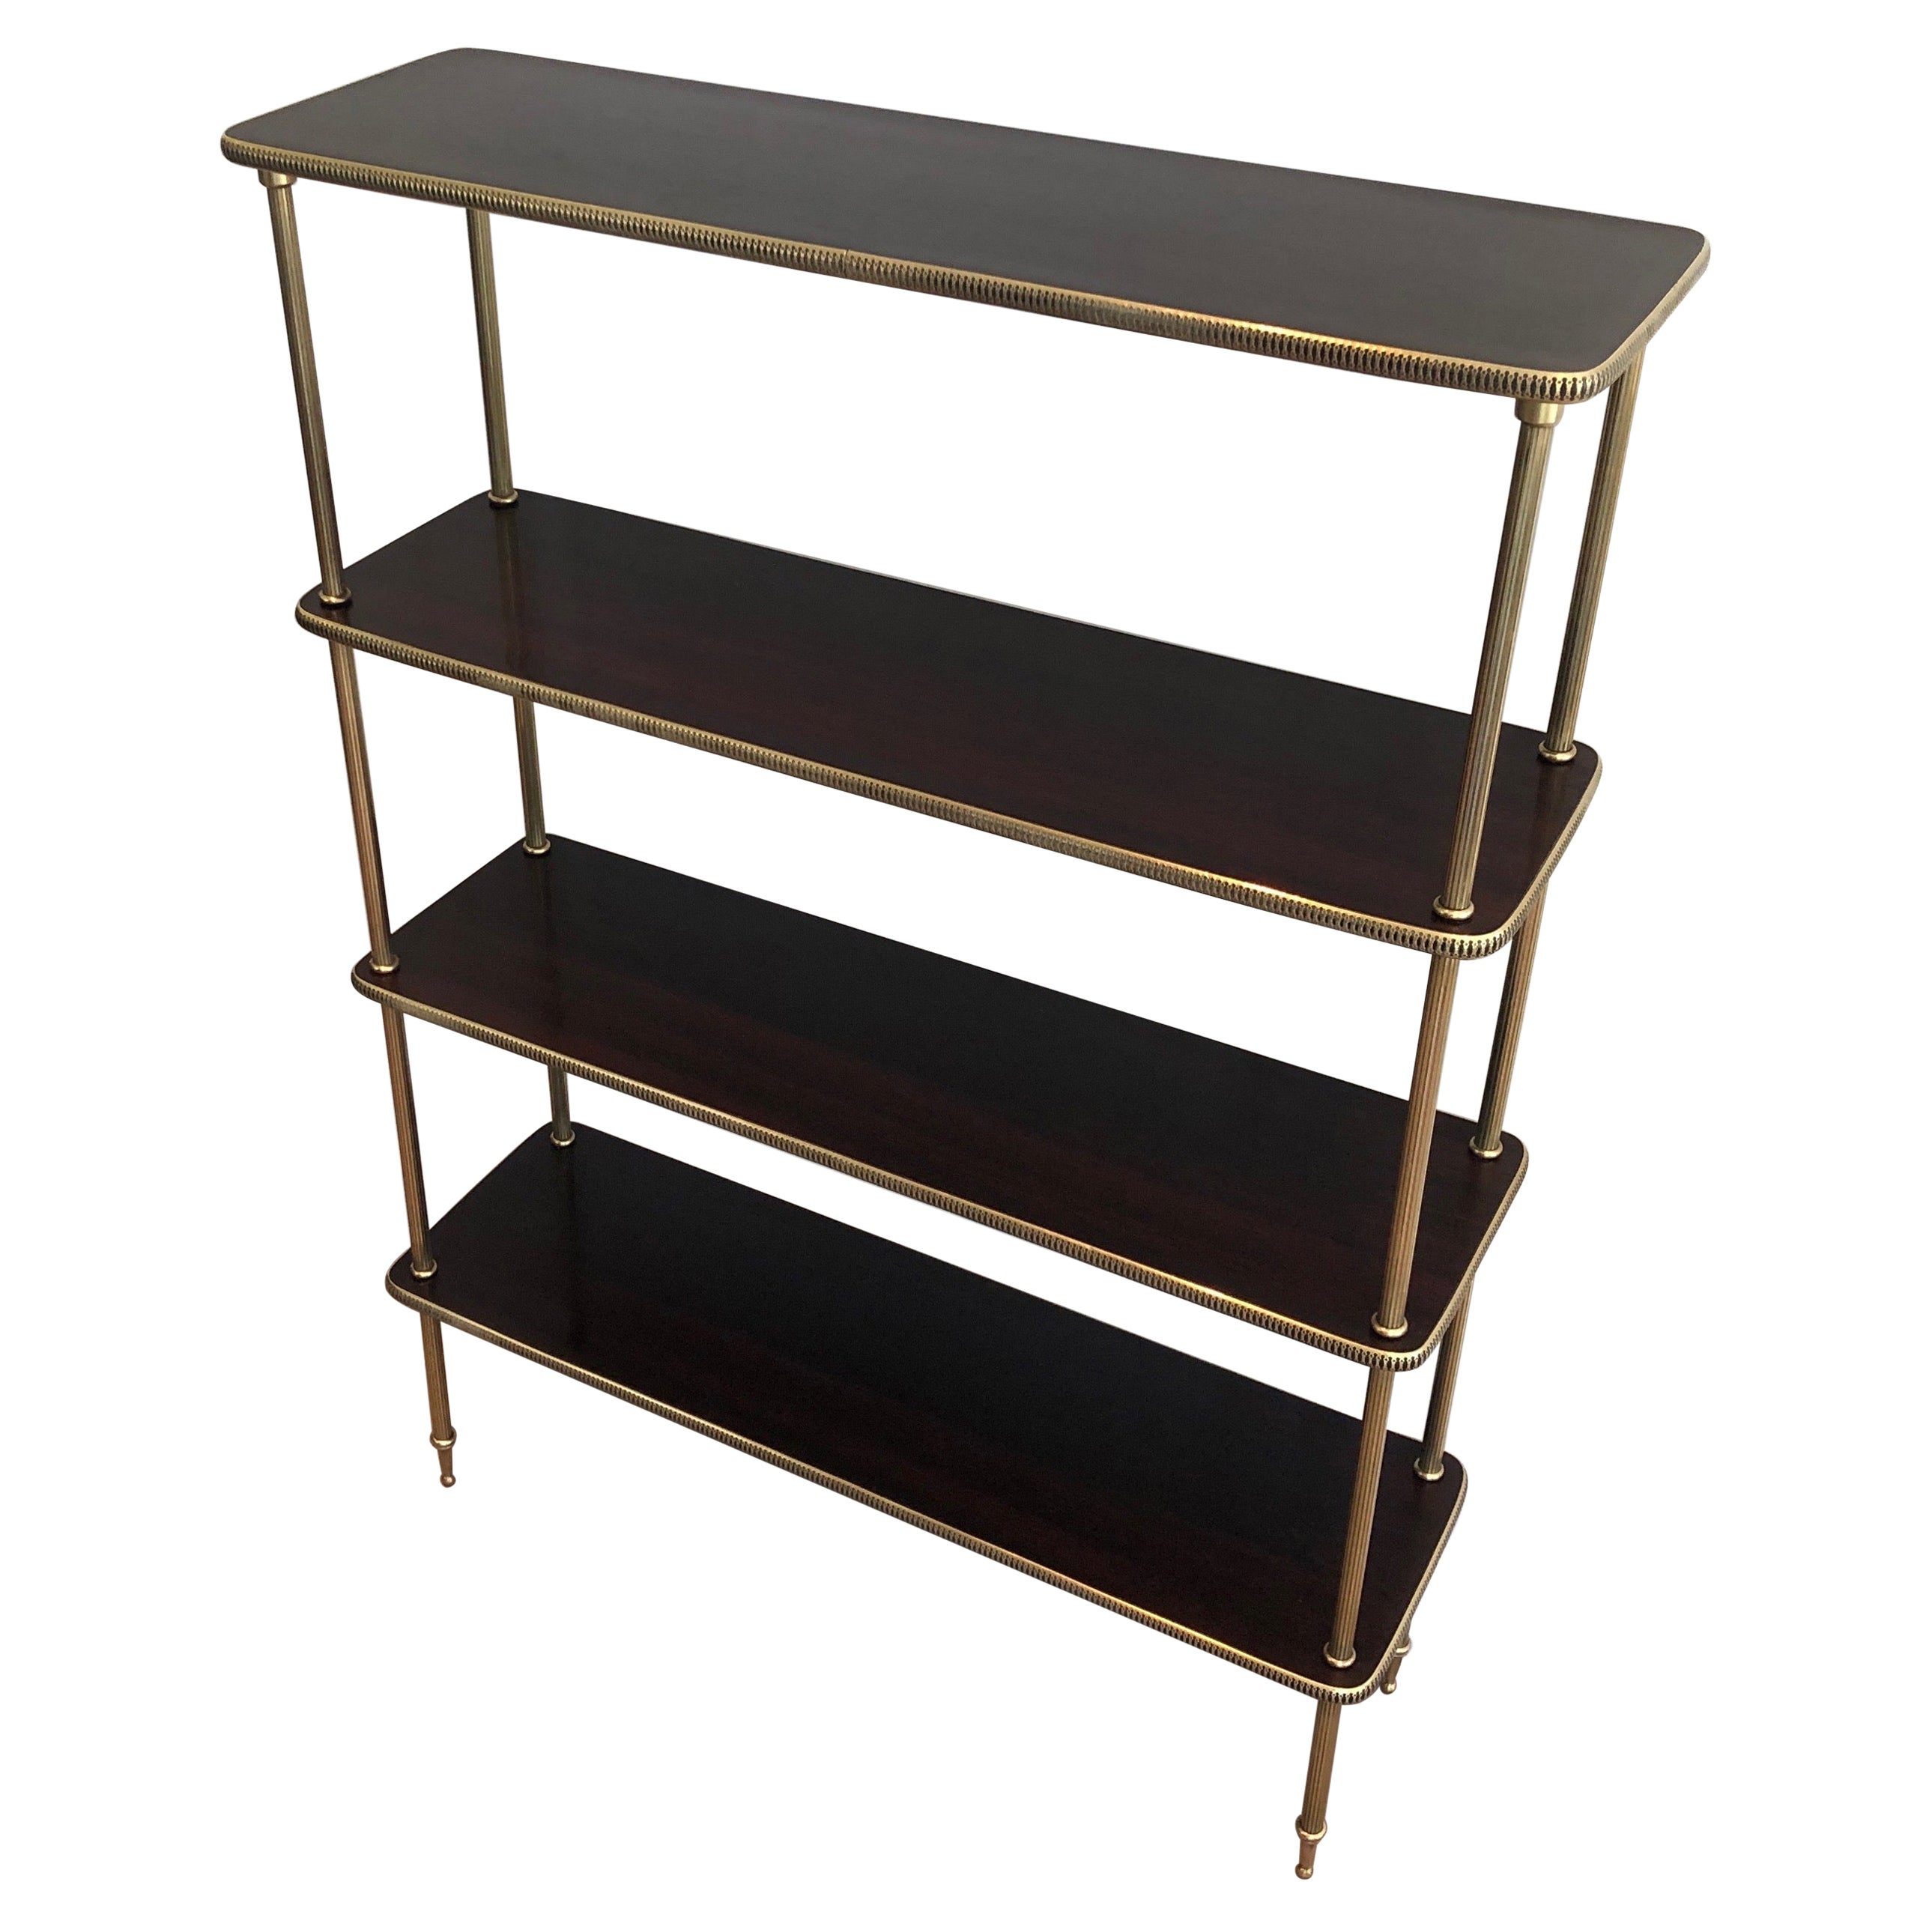 Neoclassical Style Mahogany and Brass Shelves Unit, French, Circa 1940